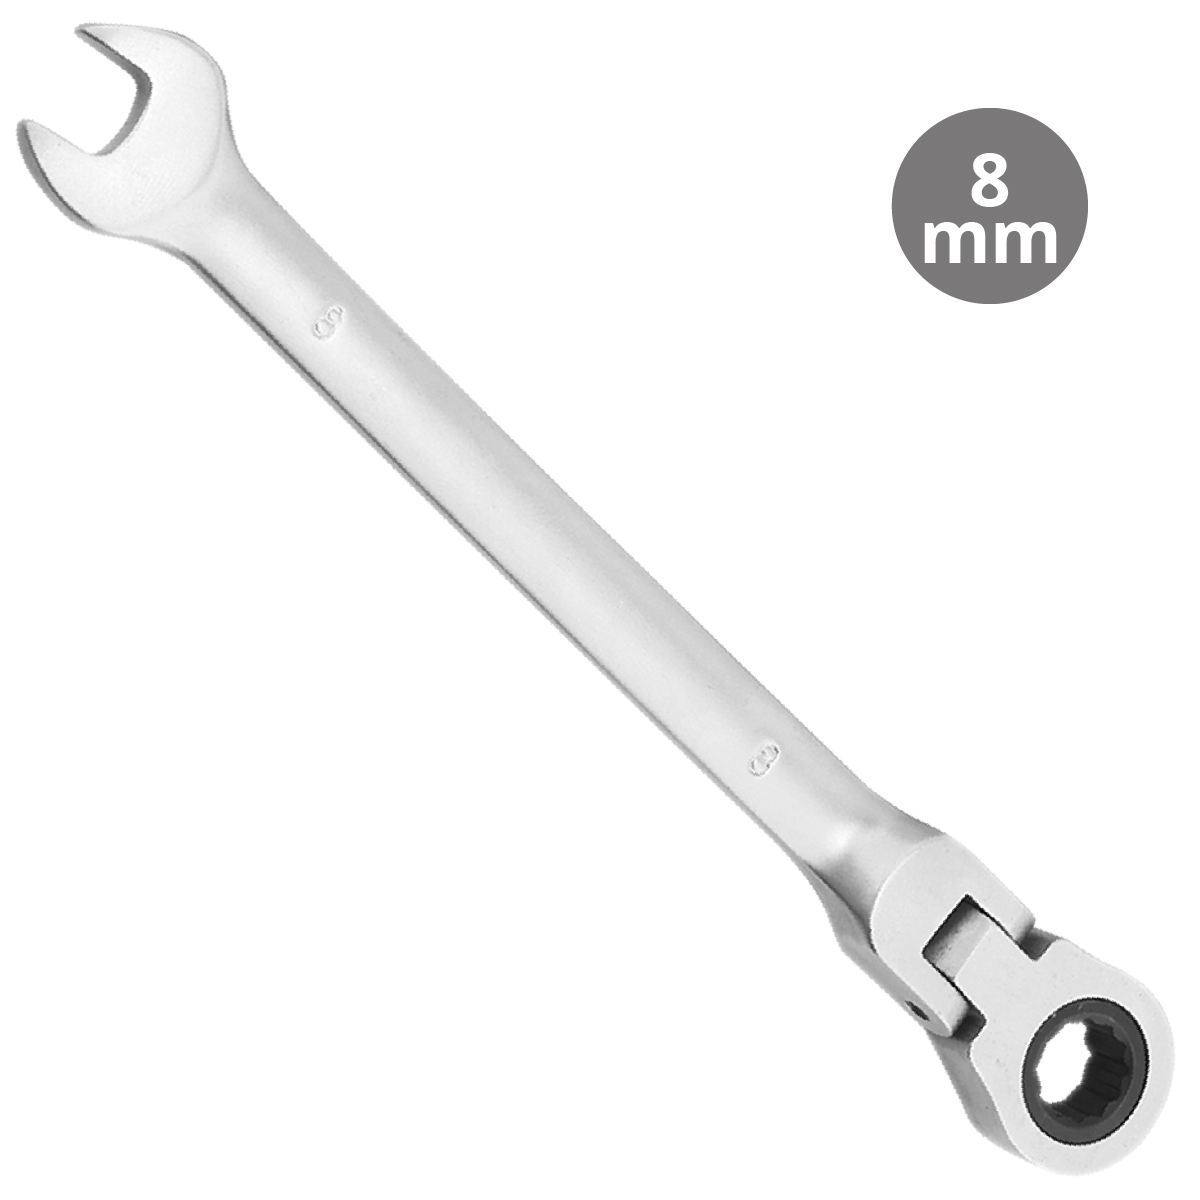 Combination rachet wrenches CR-V 8mm